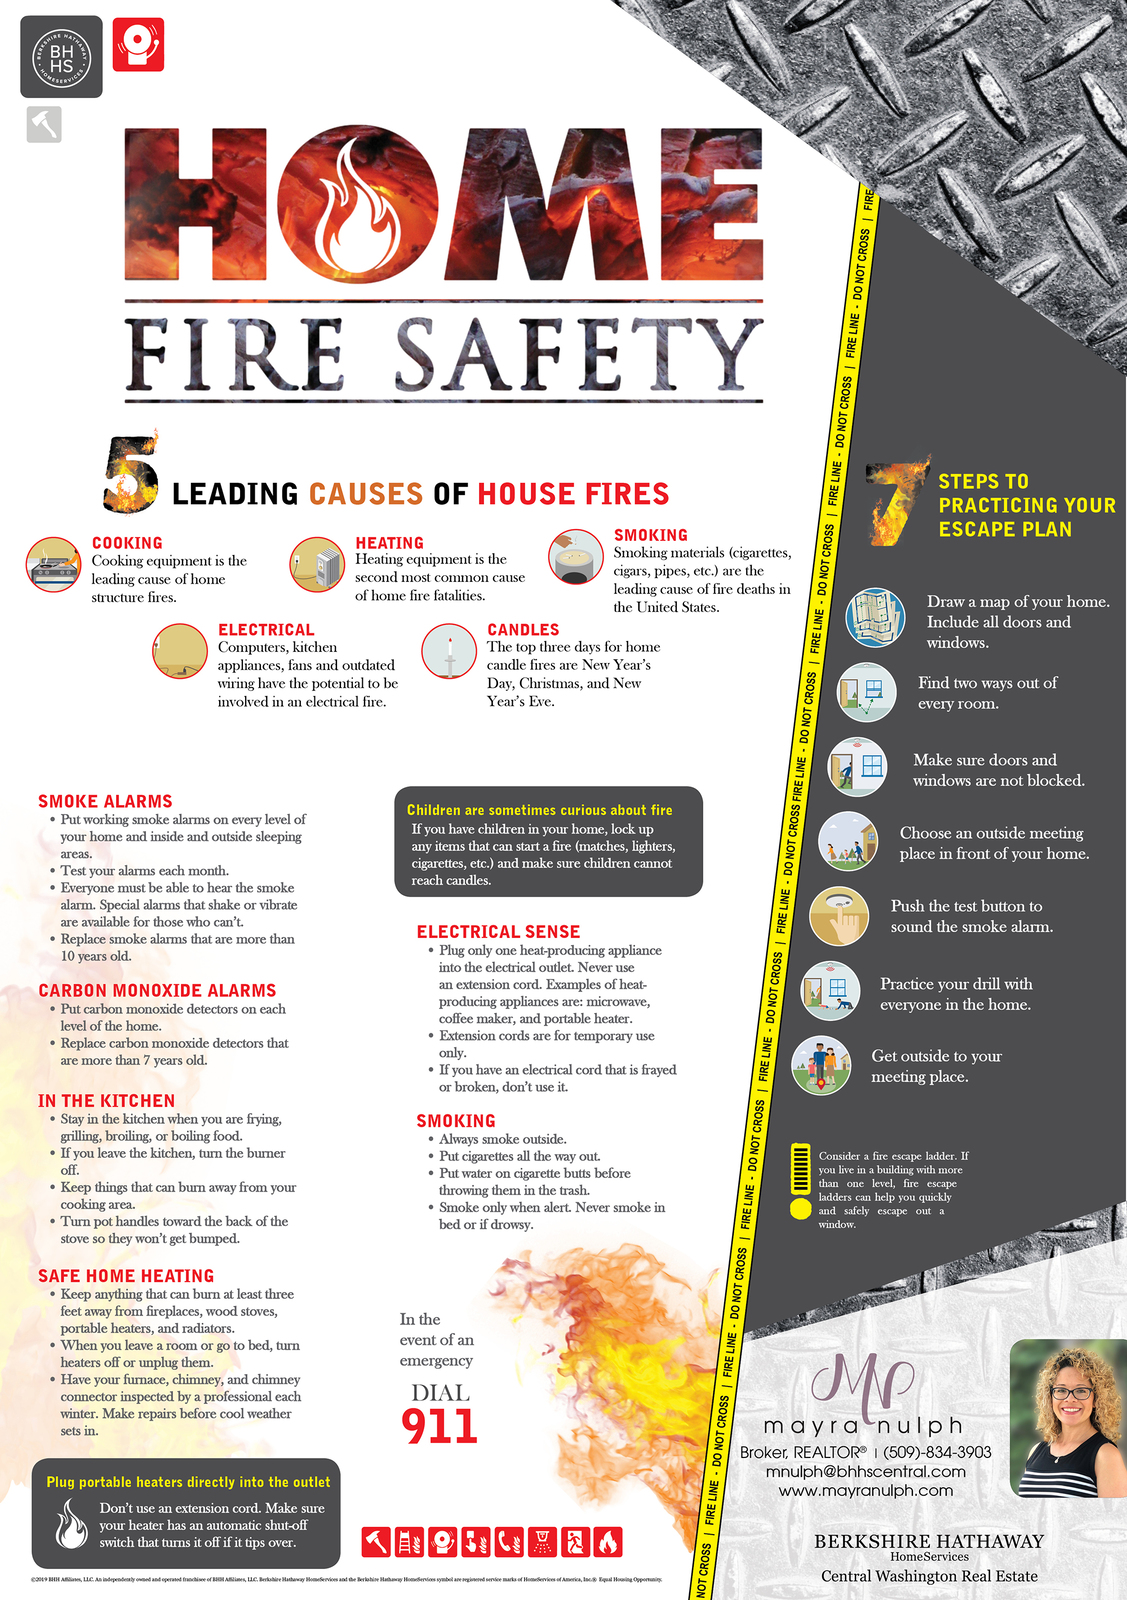 fire-safety-brochure